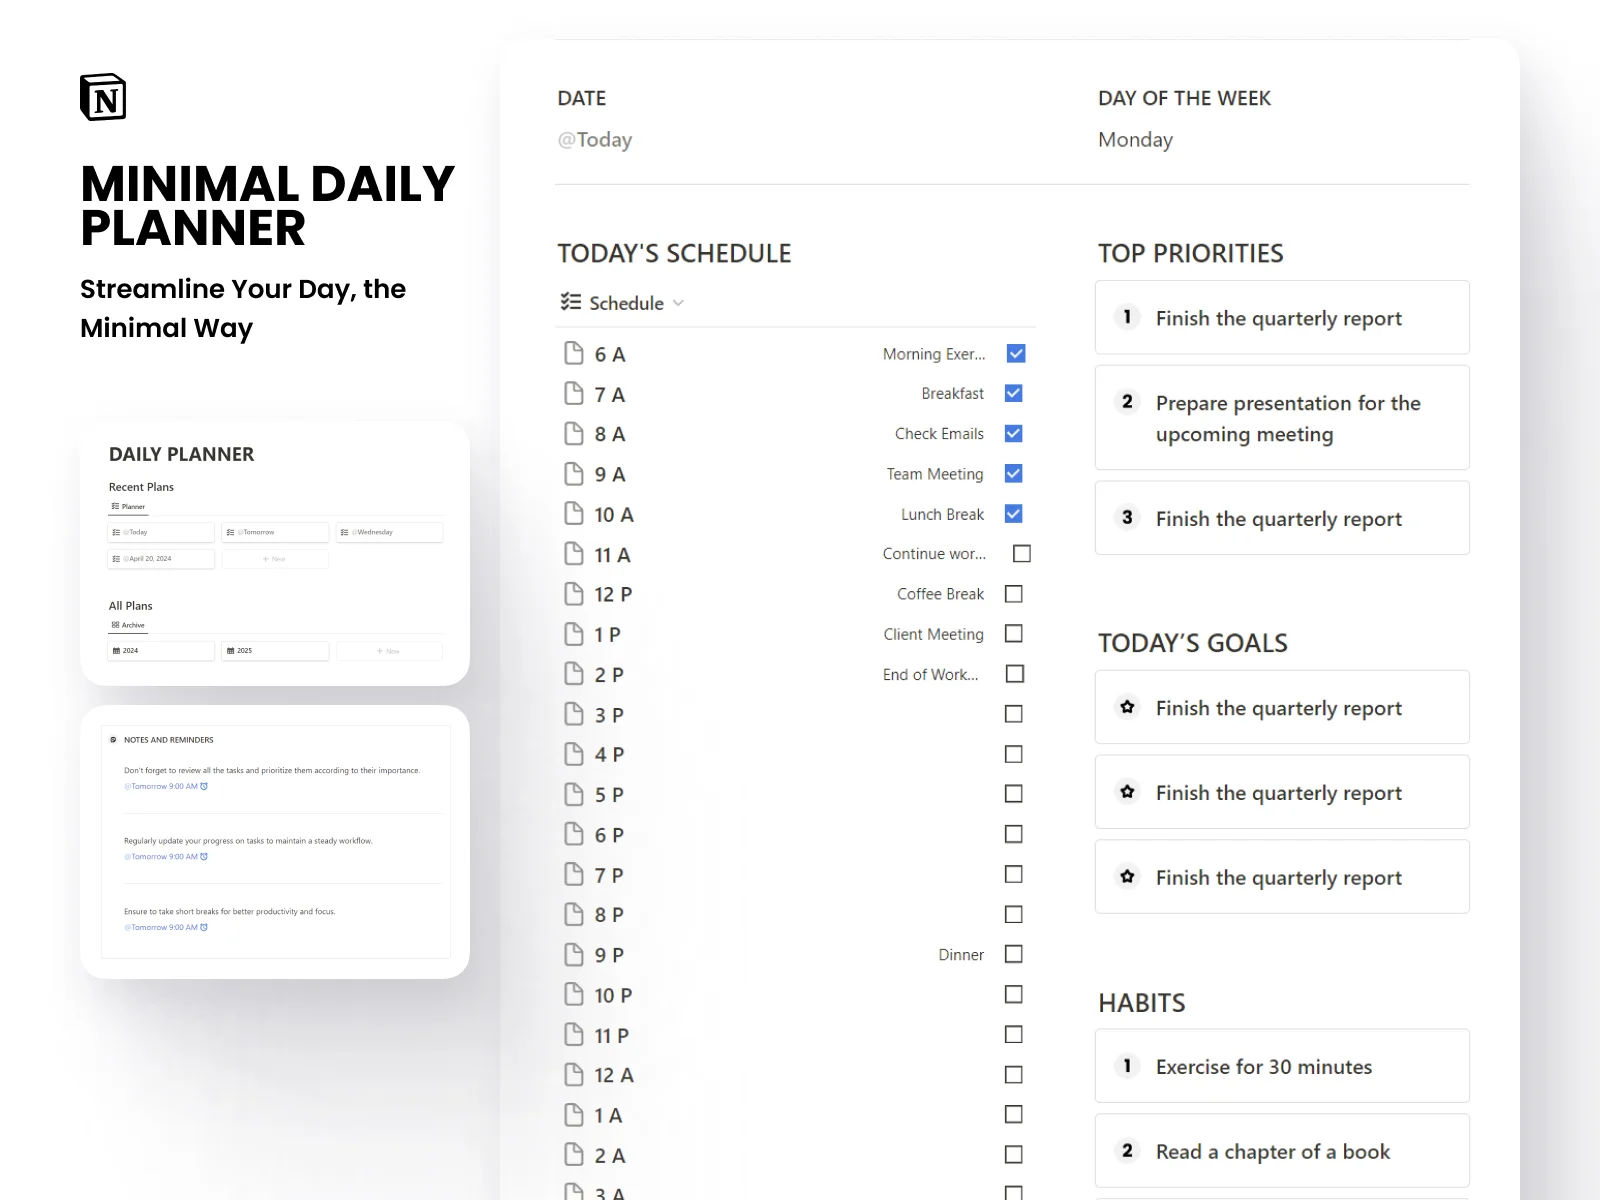 Free Notion Minimal Daily Planner